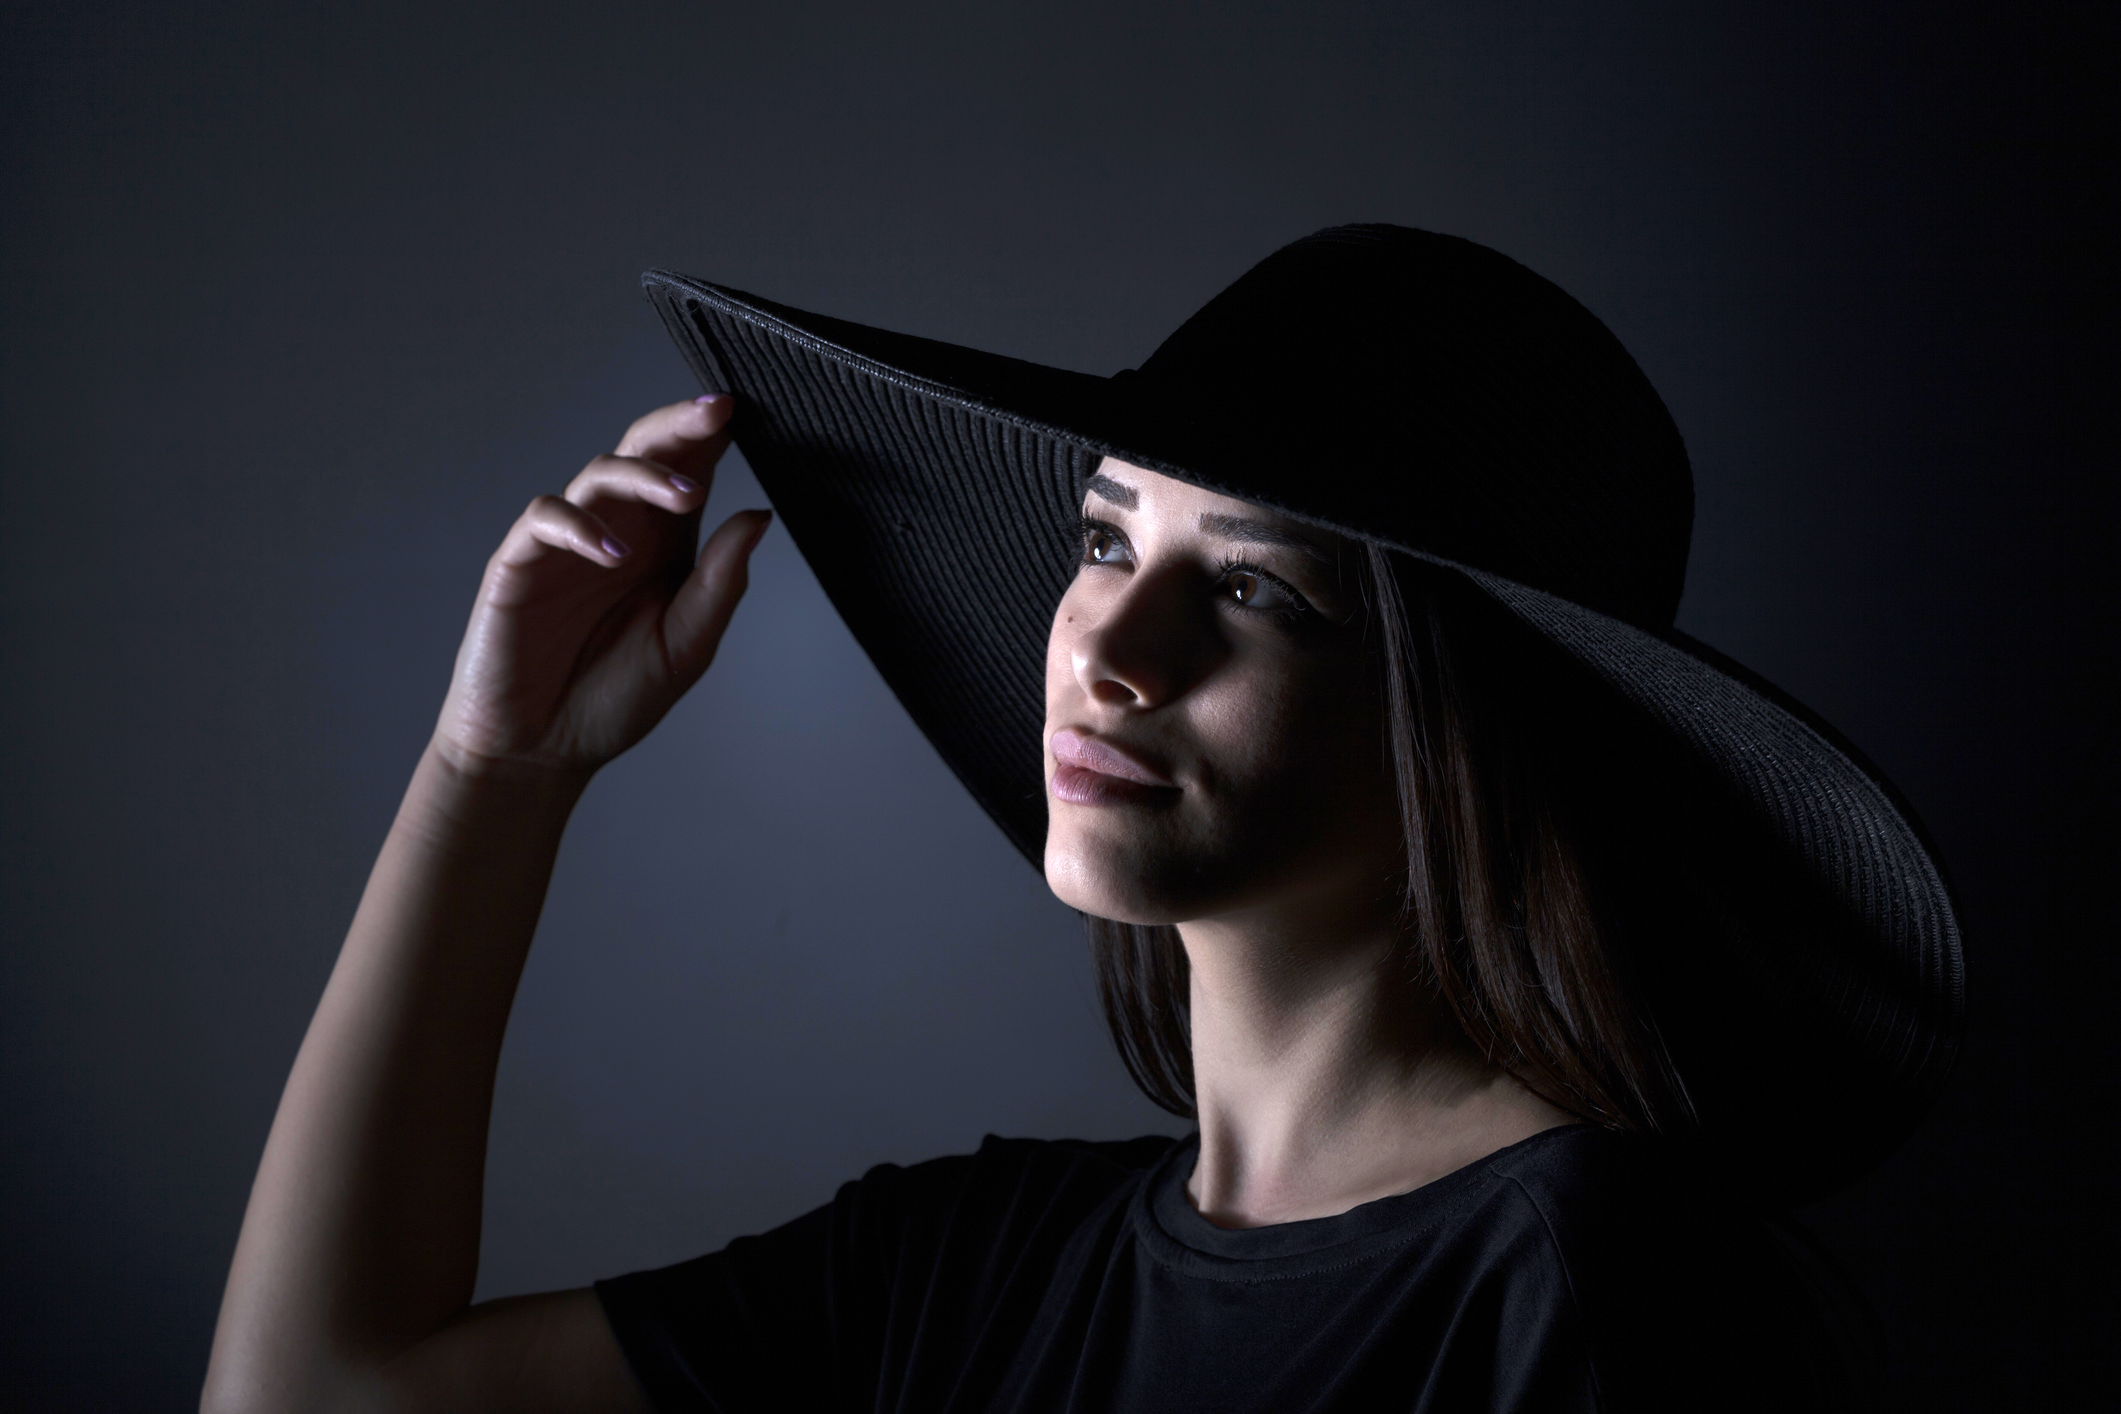 One-Light Portrait That Will Make Images Pop